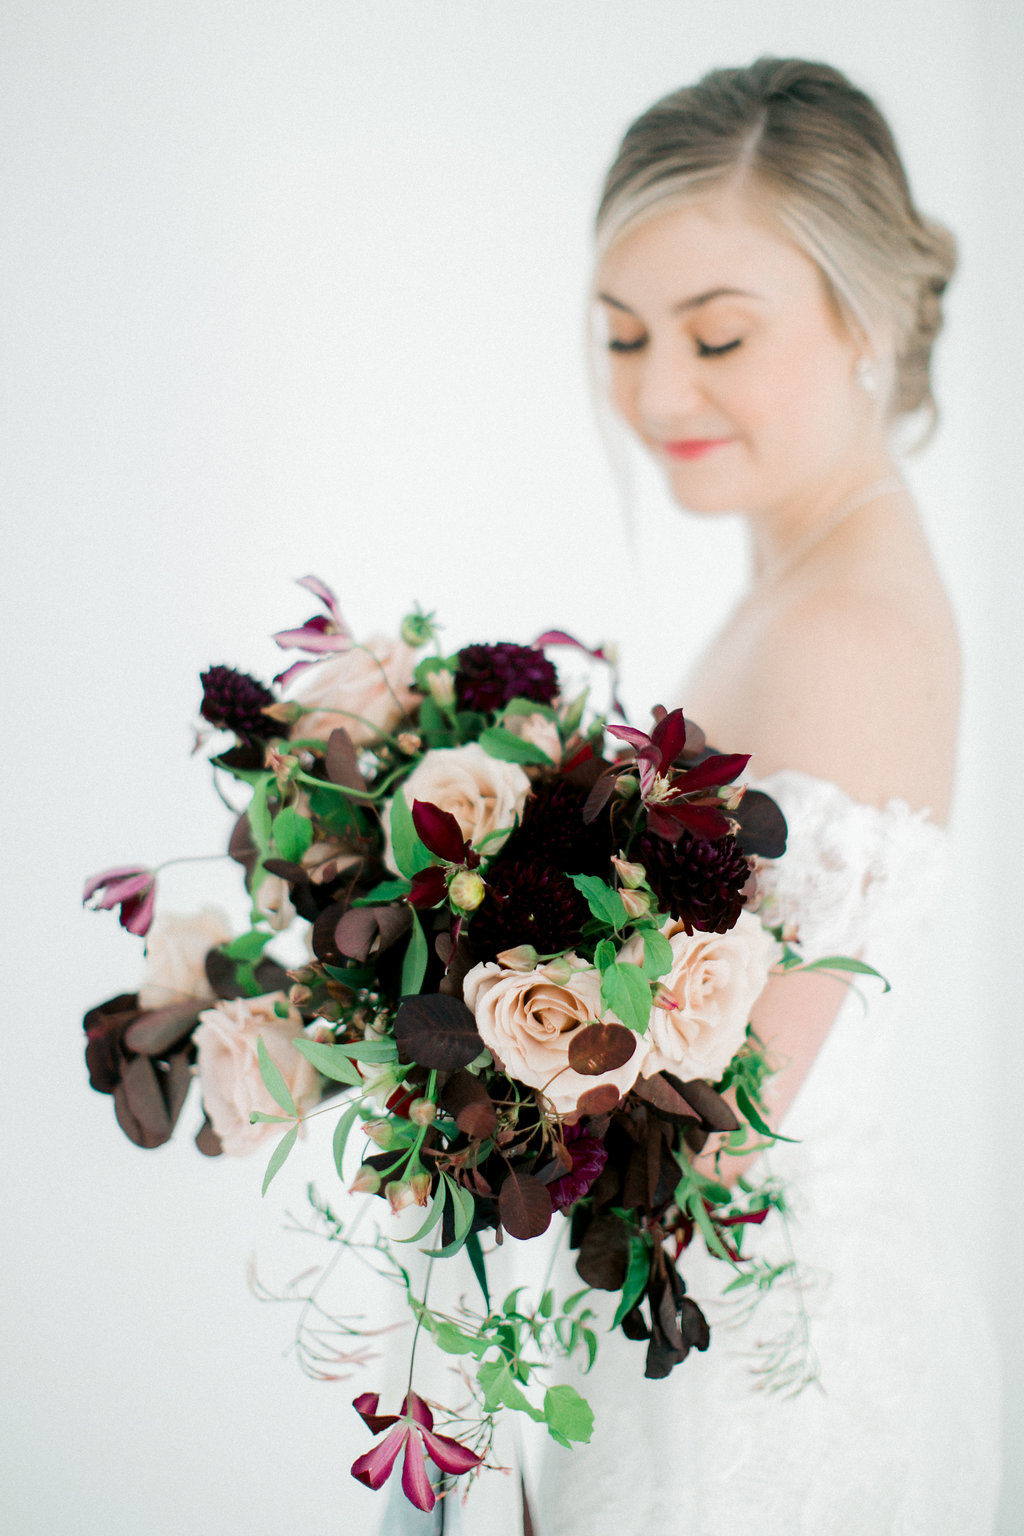 Why Do I Need a Bridal Portrait Session - Lubbock Wedding Flowers